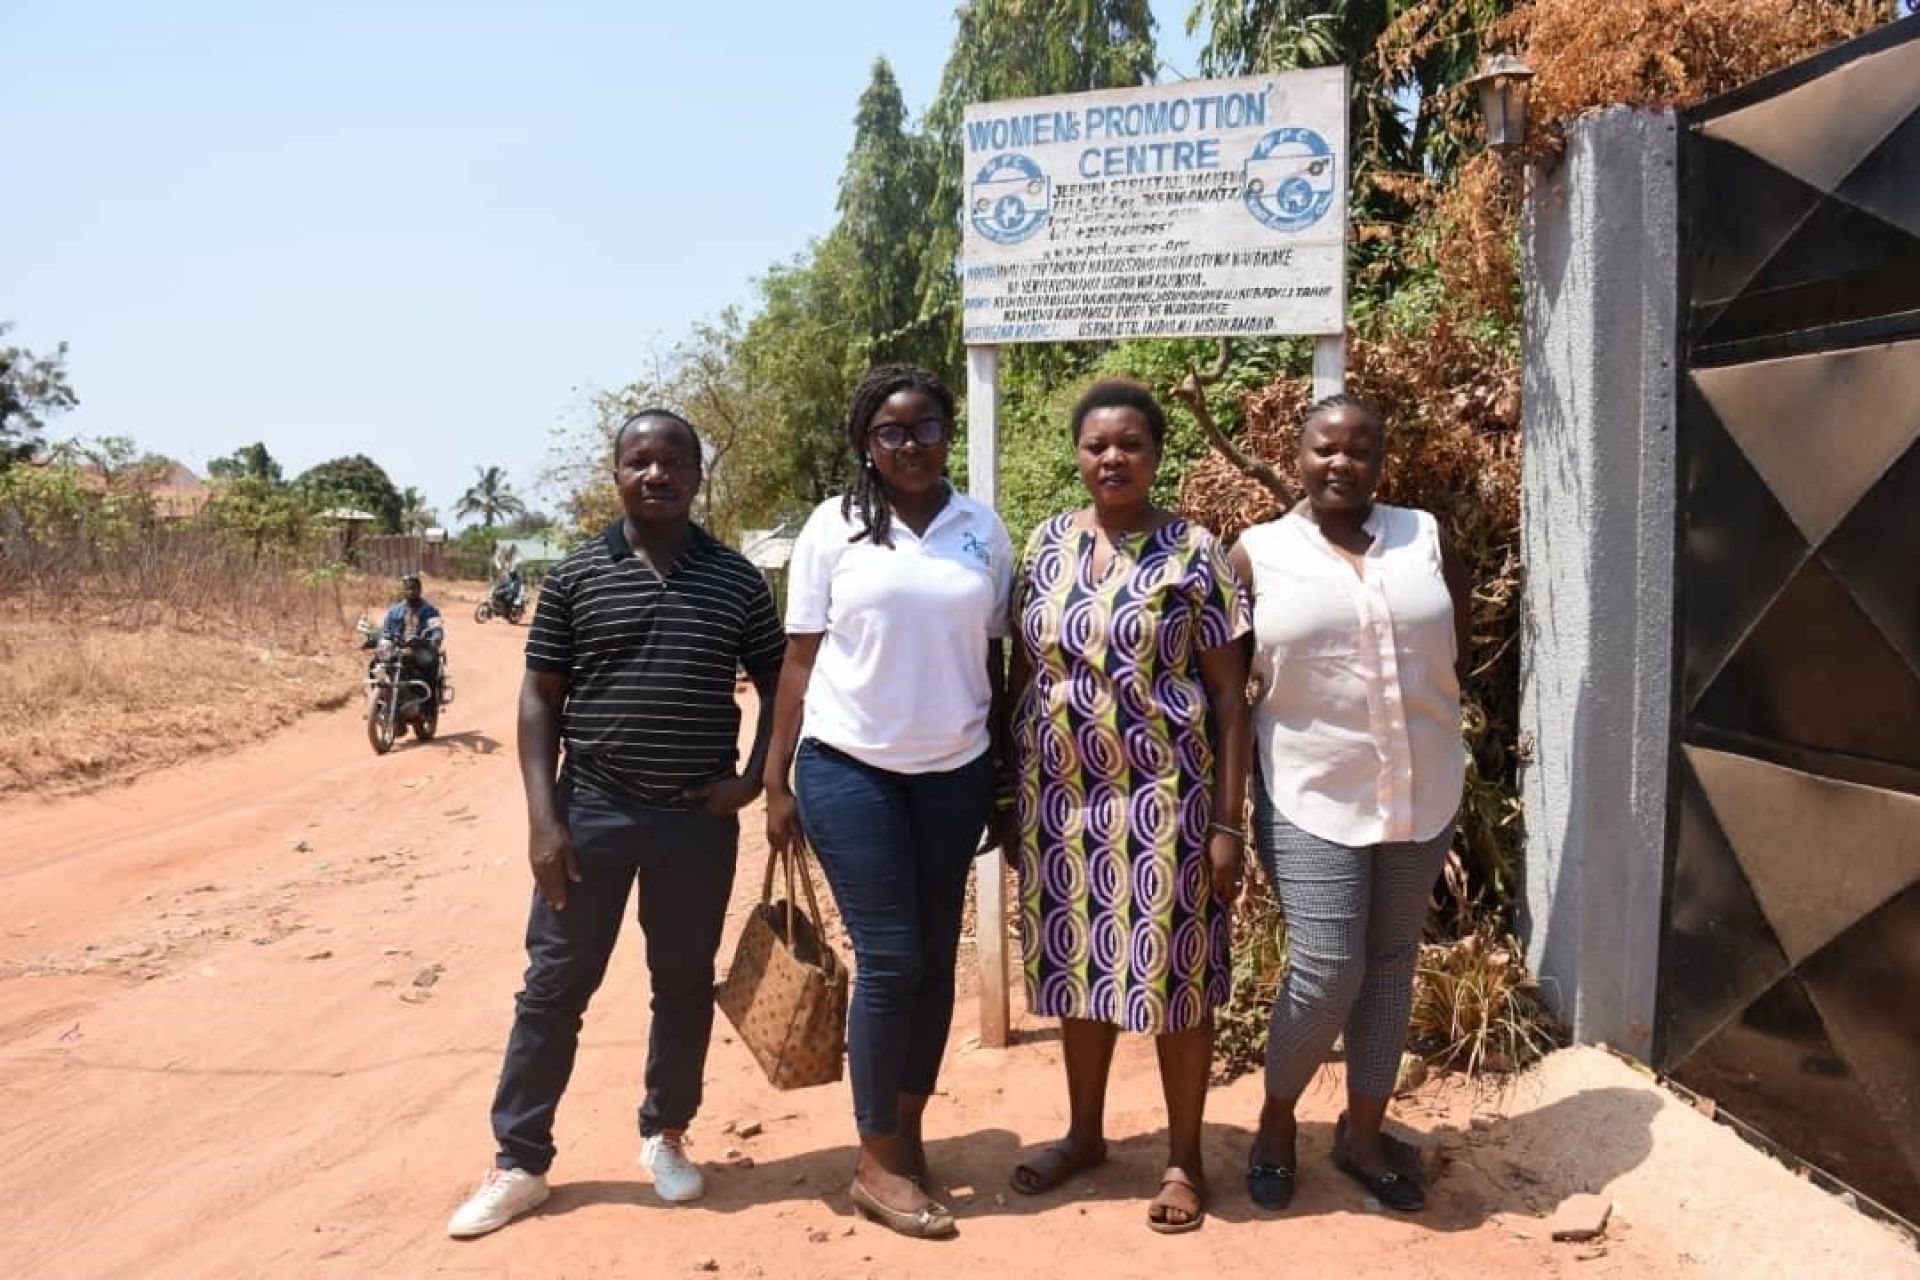 Unbounded: Action on Violence Against Women in Kigoma